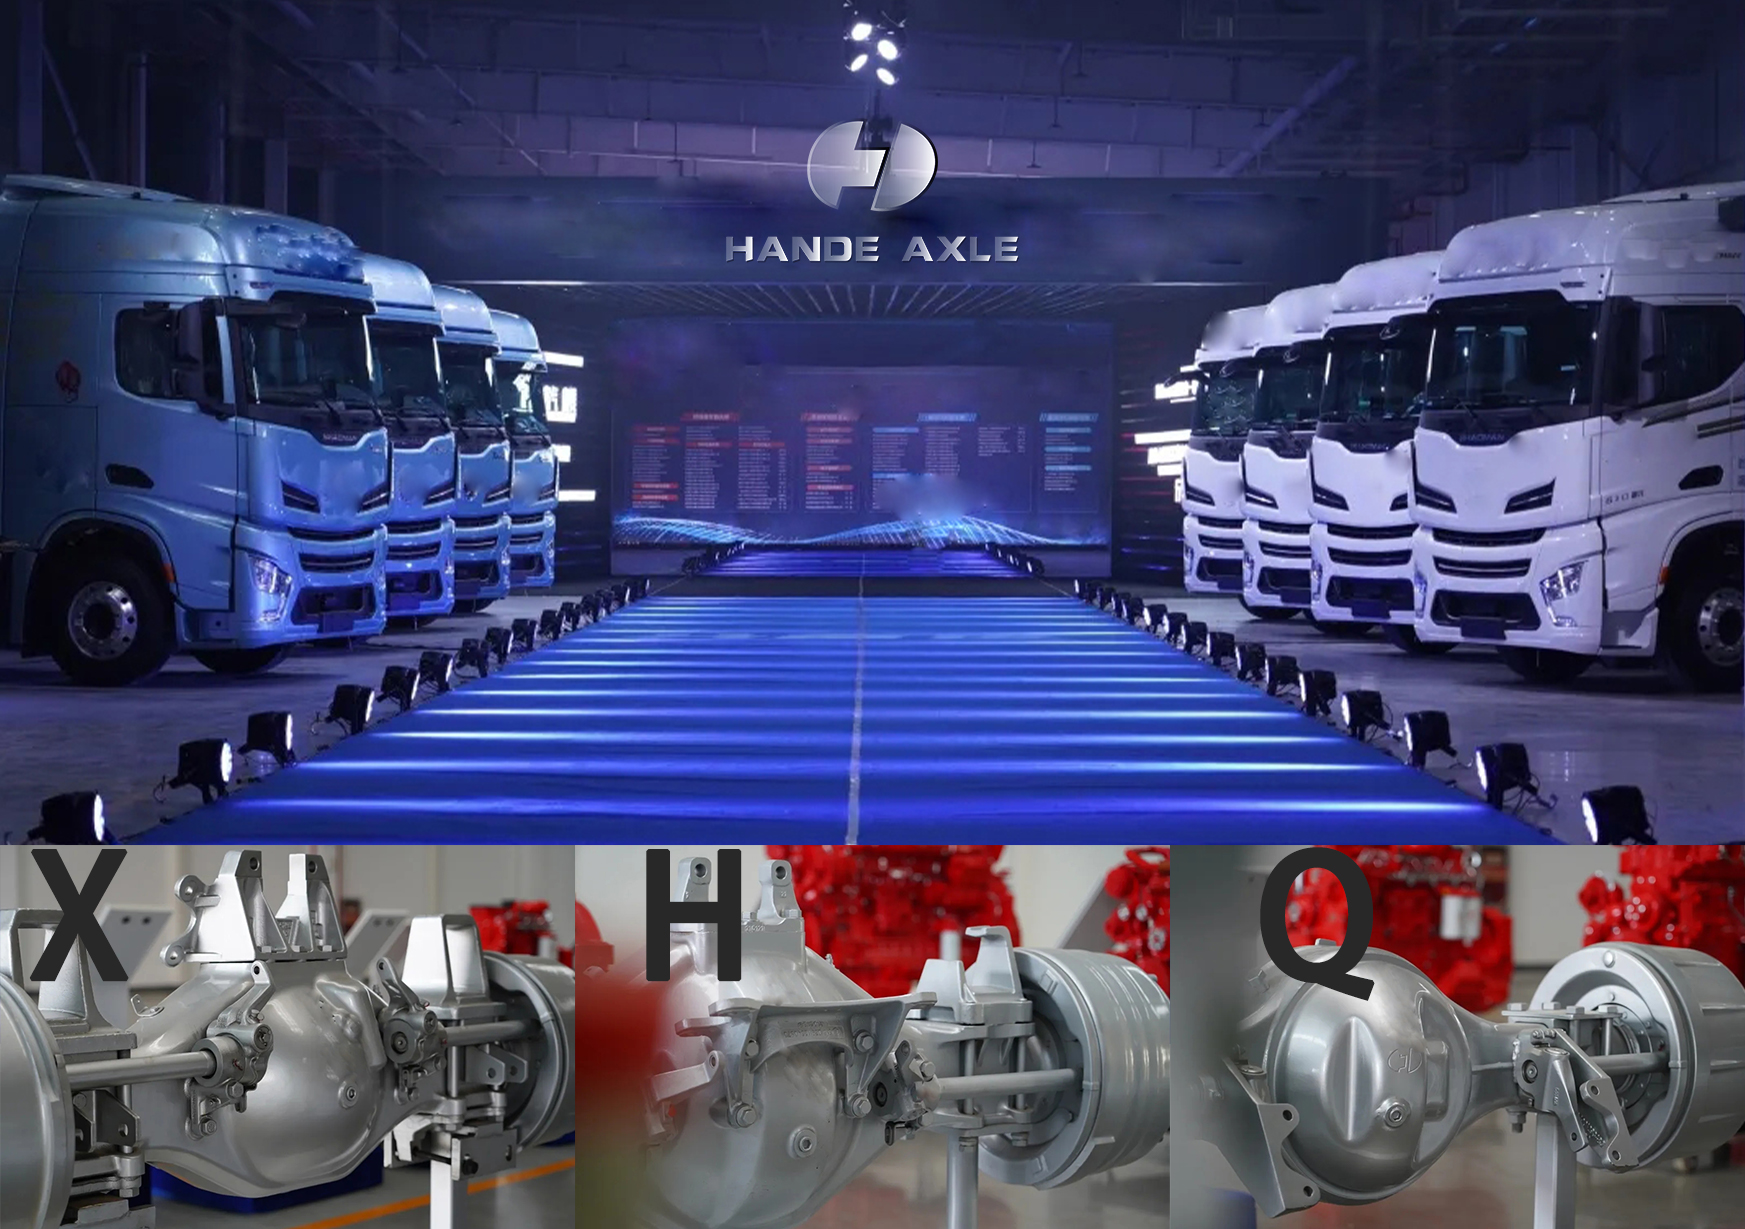 HanDe X, H, Q series special axle has become the favorite axle products of major OEMs